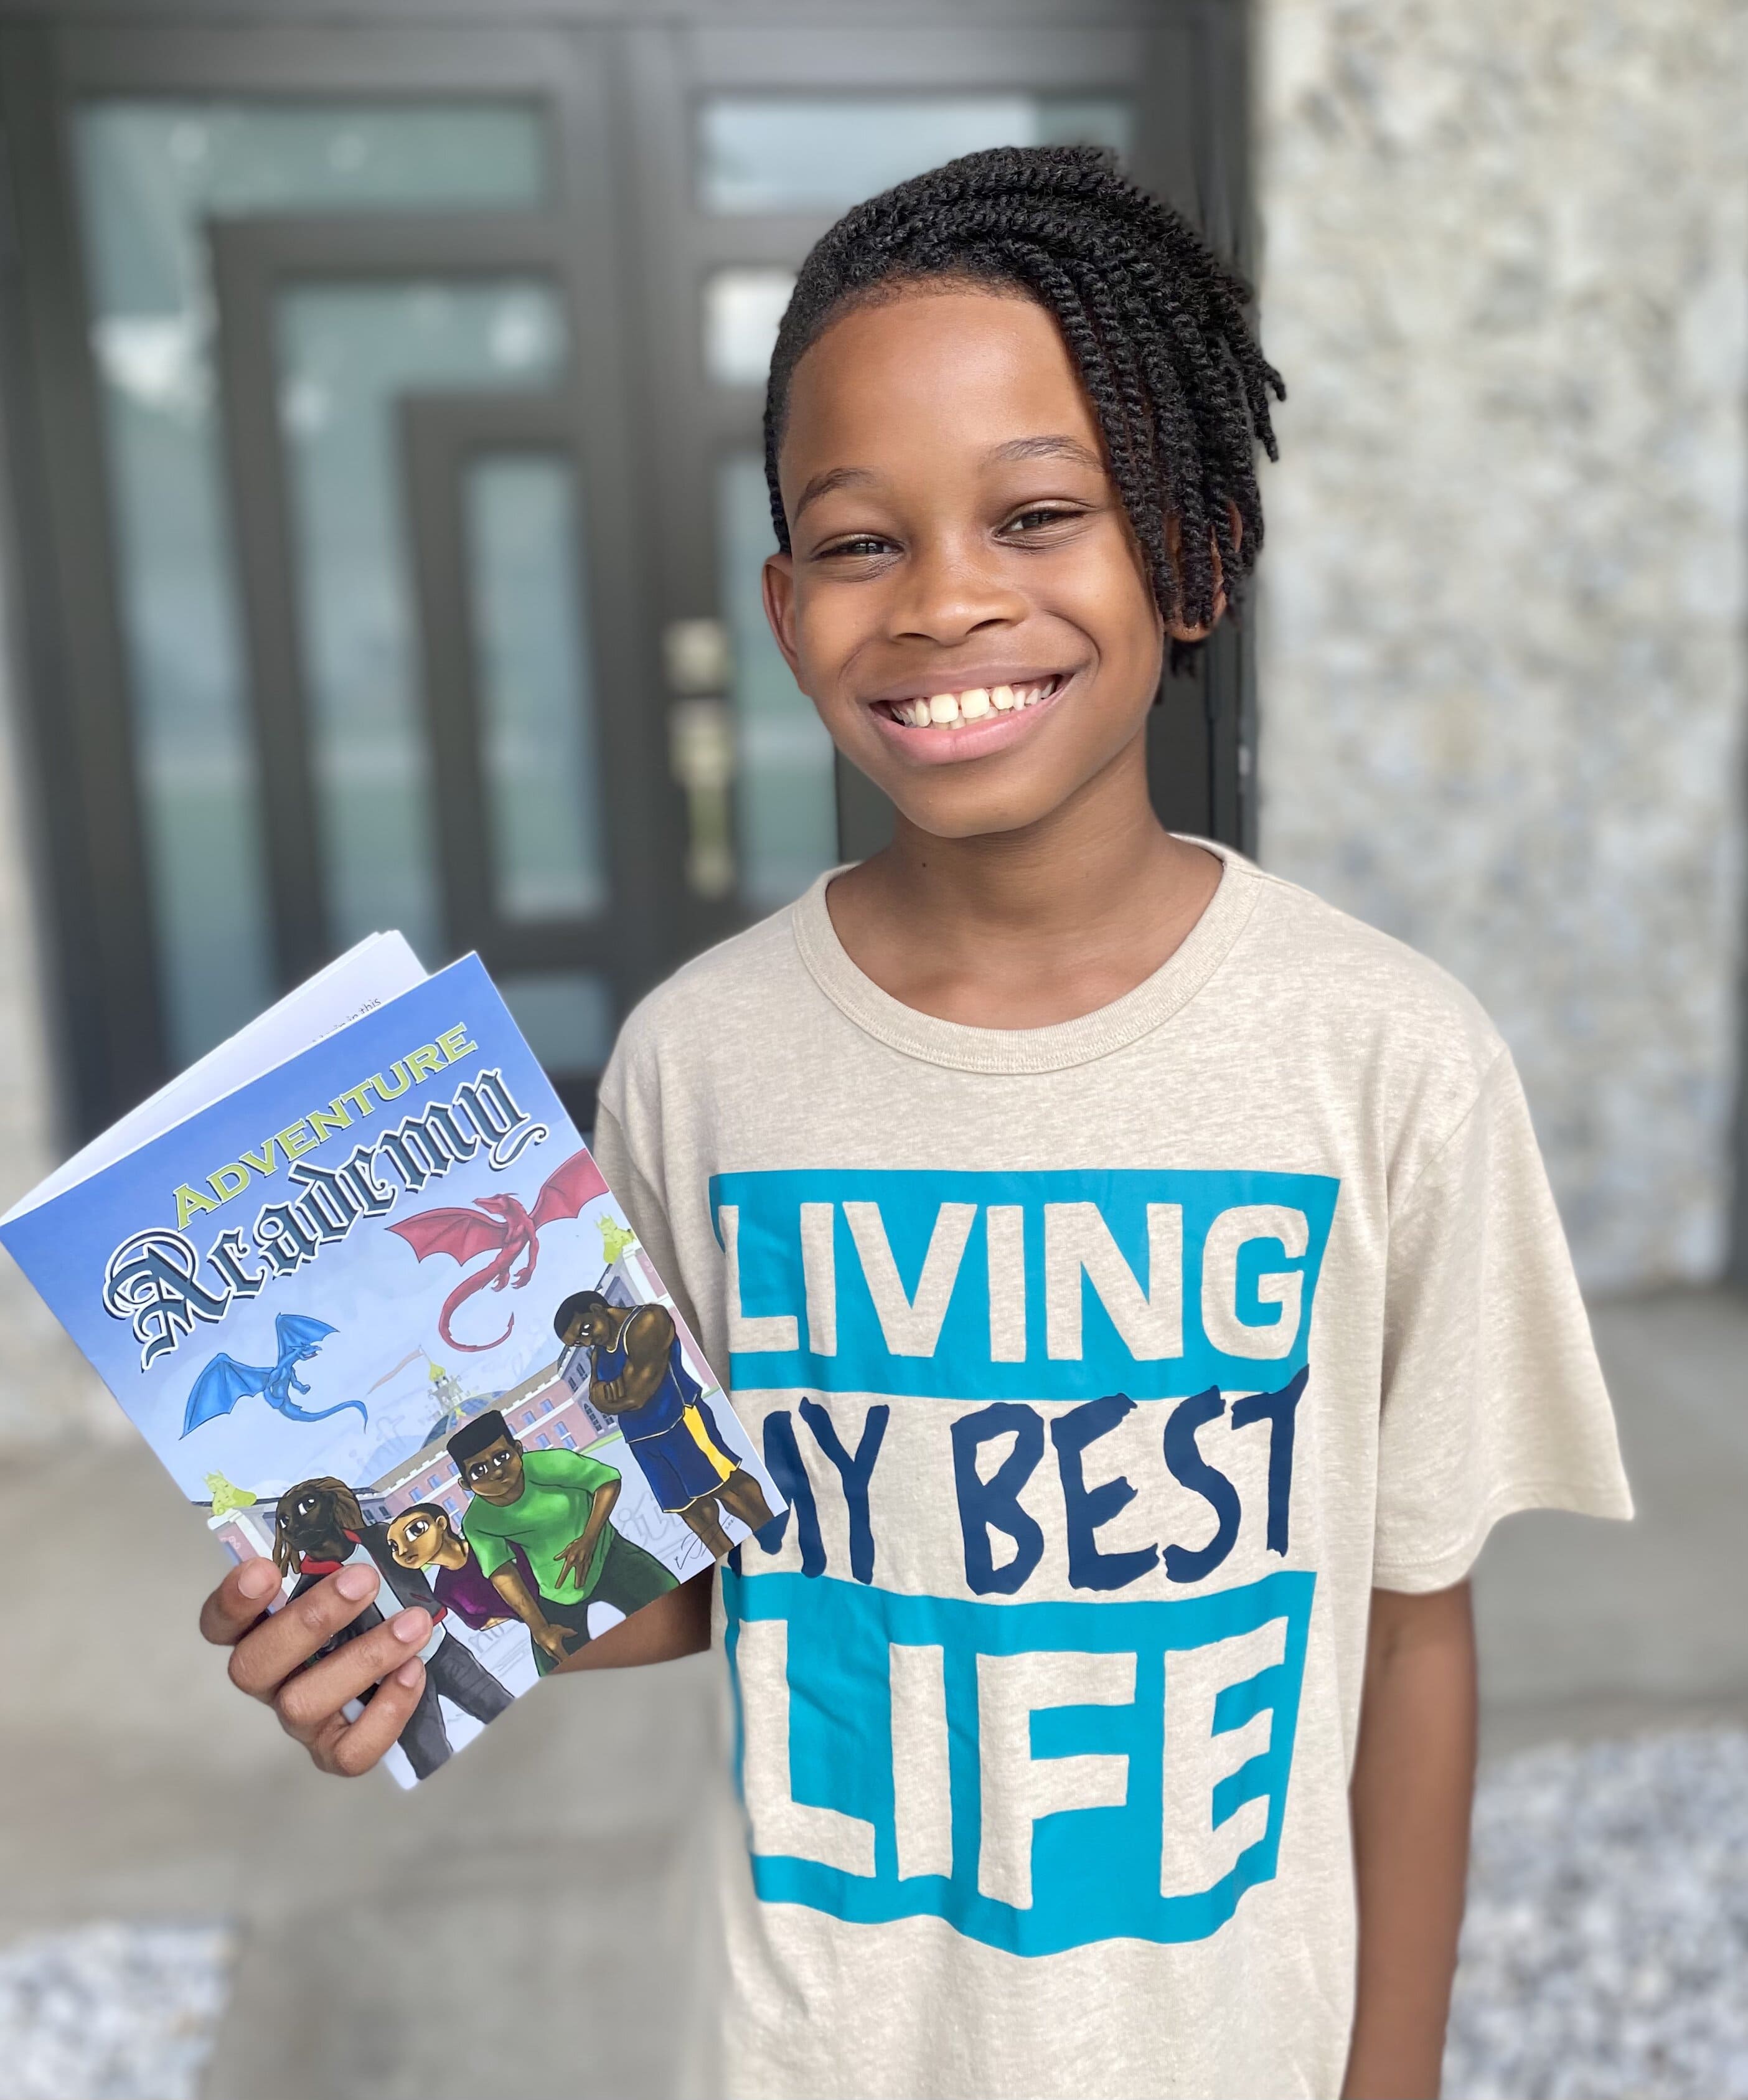 Child prodigy set to release new children’s novel series inspiring young readers to overcome challenges